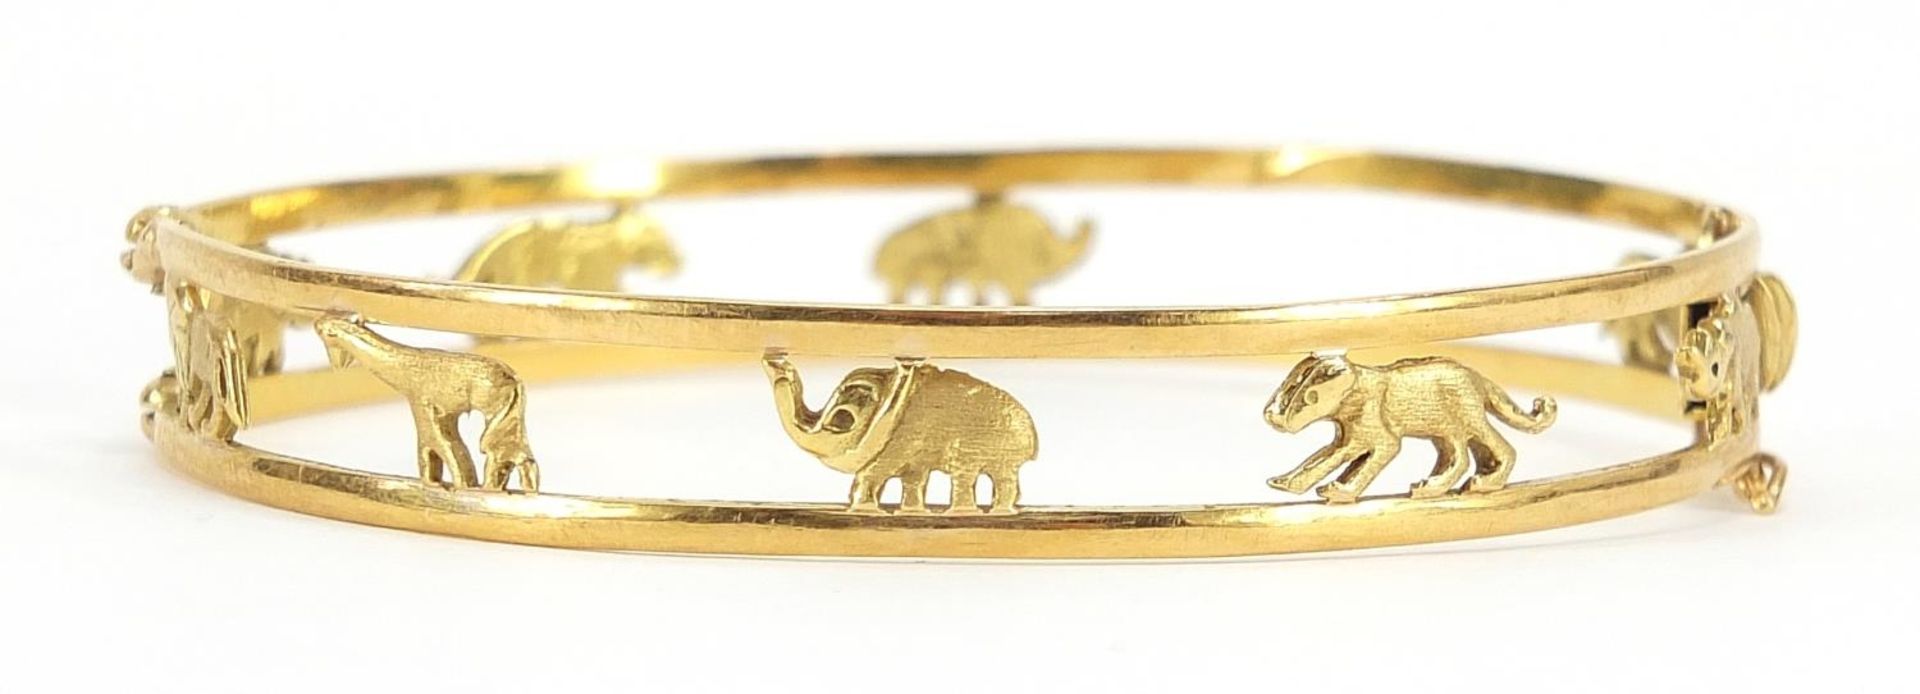 18ct gold hinged bangle pierced with animals including lion, giraffe, elephant and rhino, housed